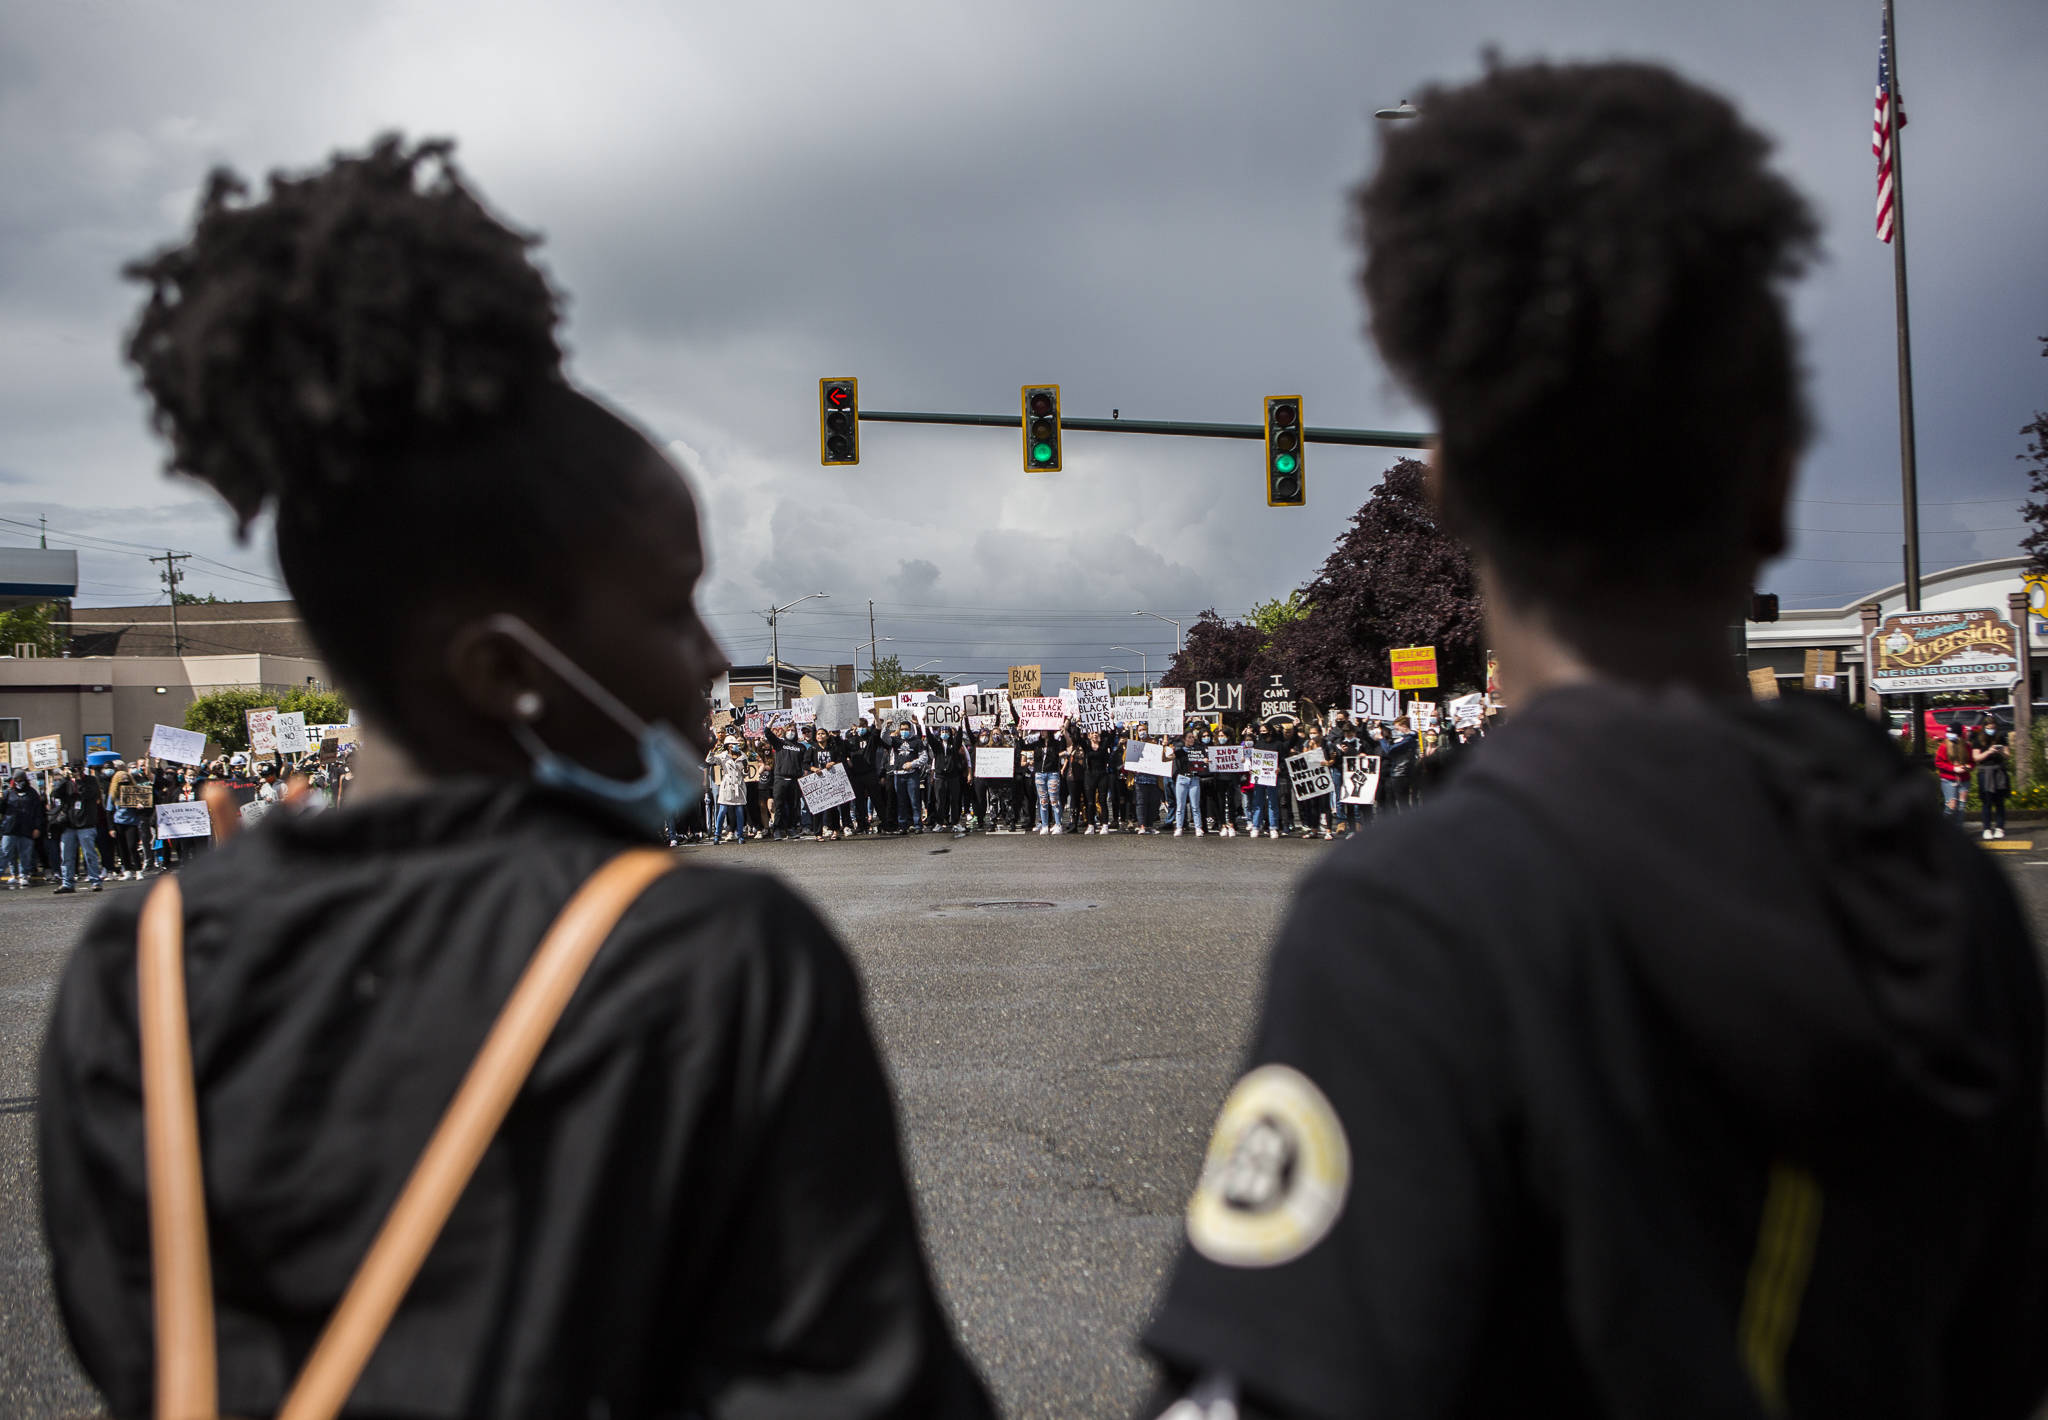 A large crowd blocks Broadway in downtown Everett during the Black Lives Matter protest on Saturday. (Olivia Vanni / The Herald)